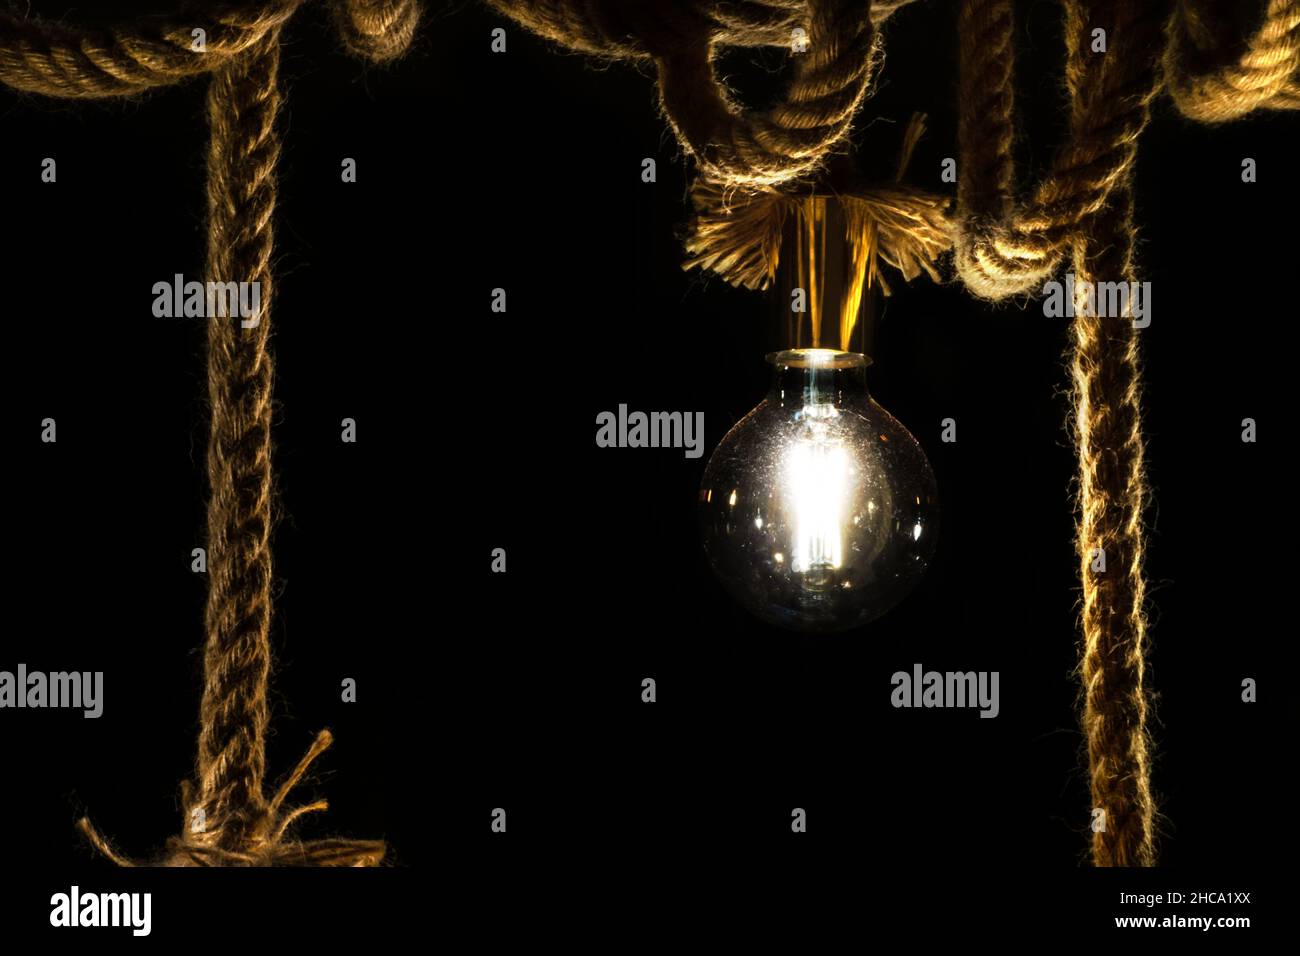 Old light bulb on rope in front of black background Stock Photo